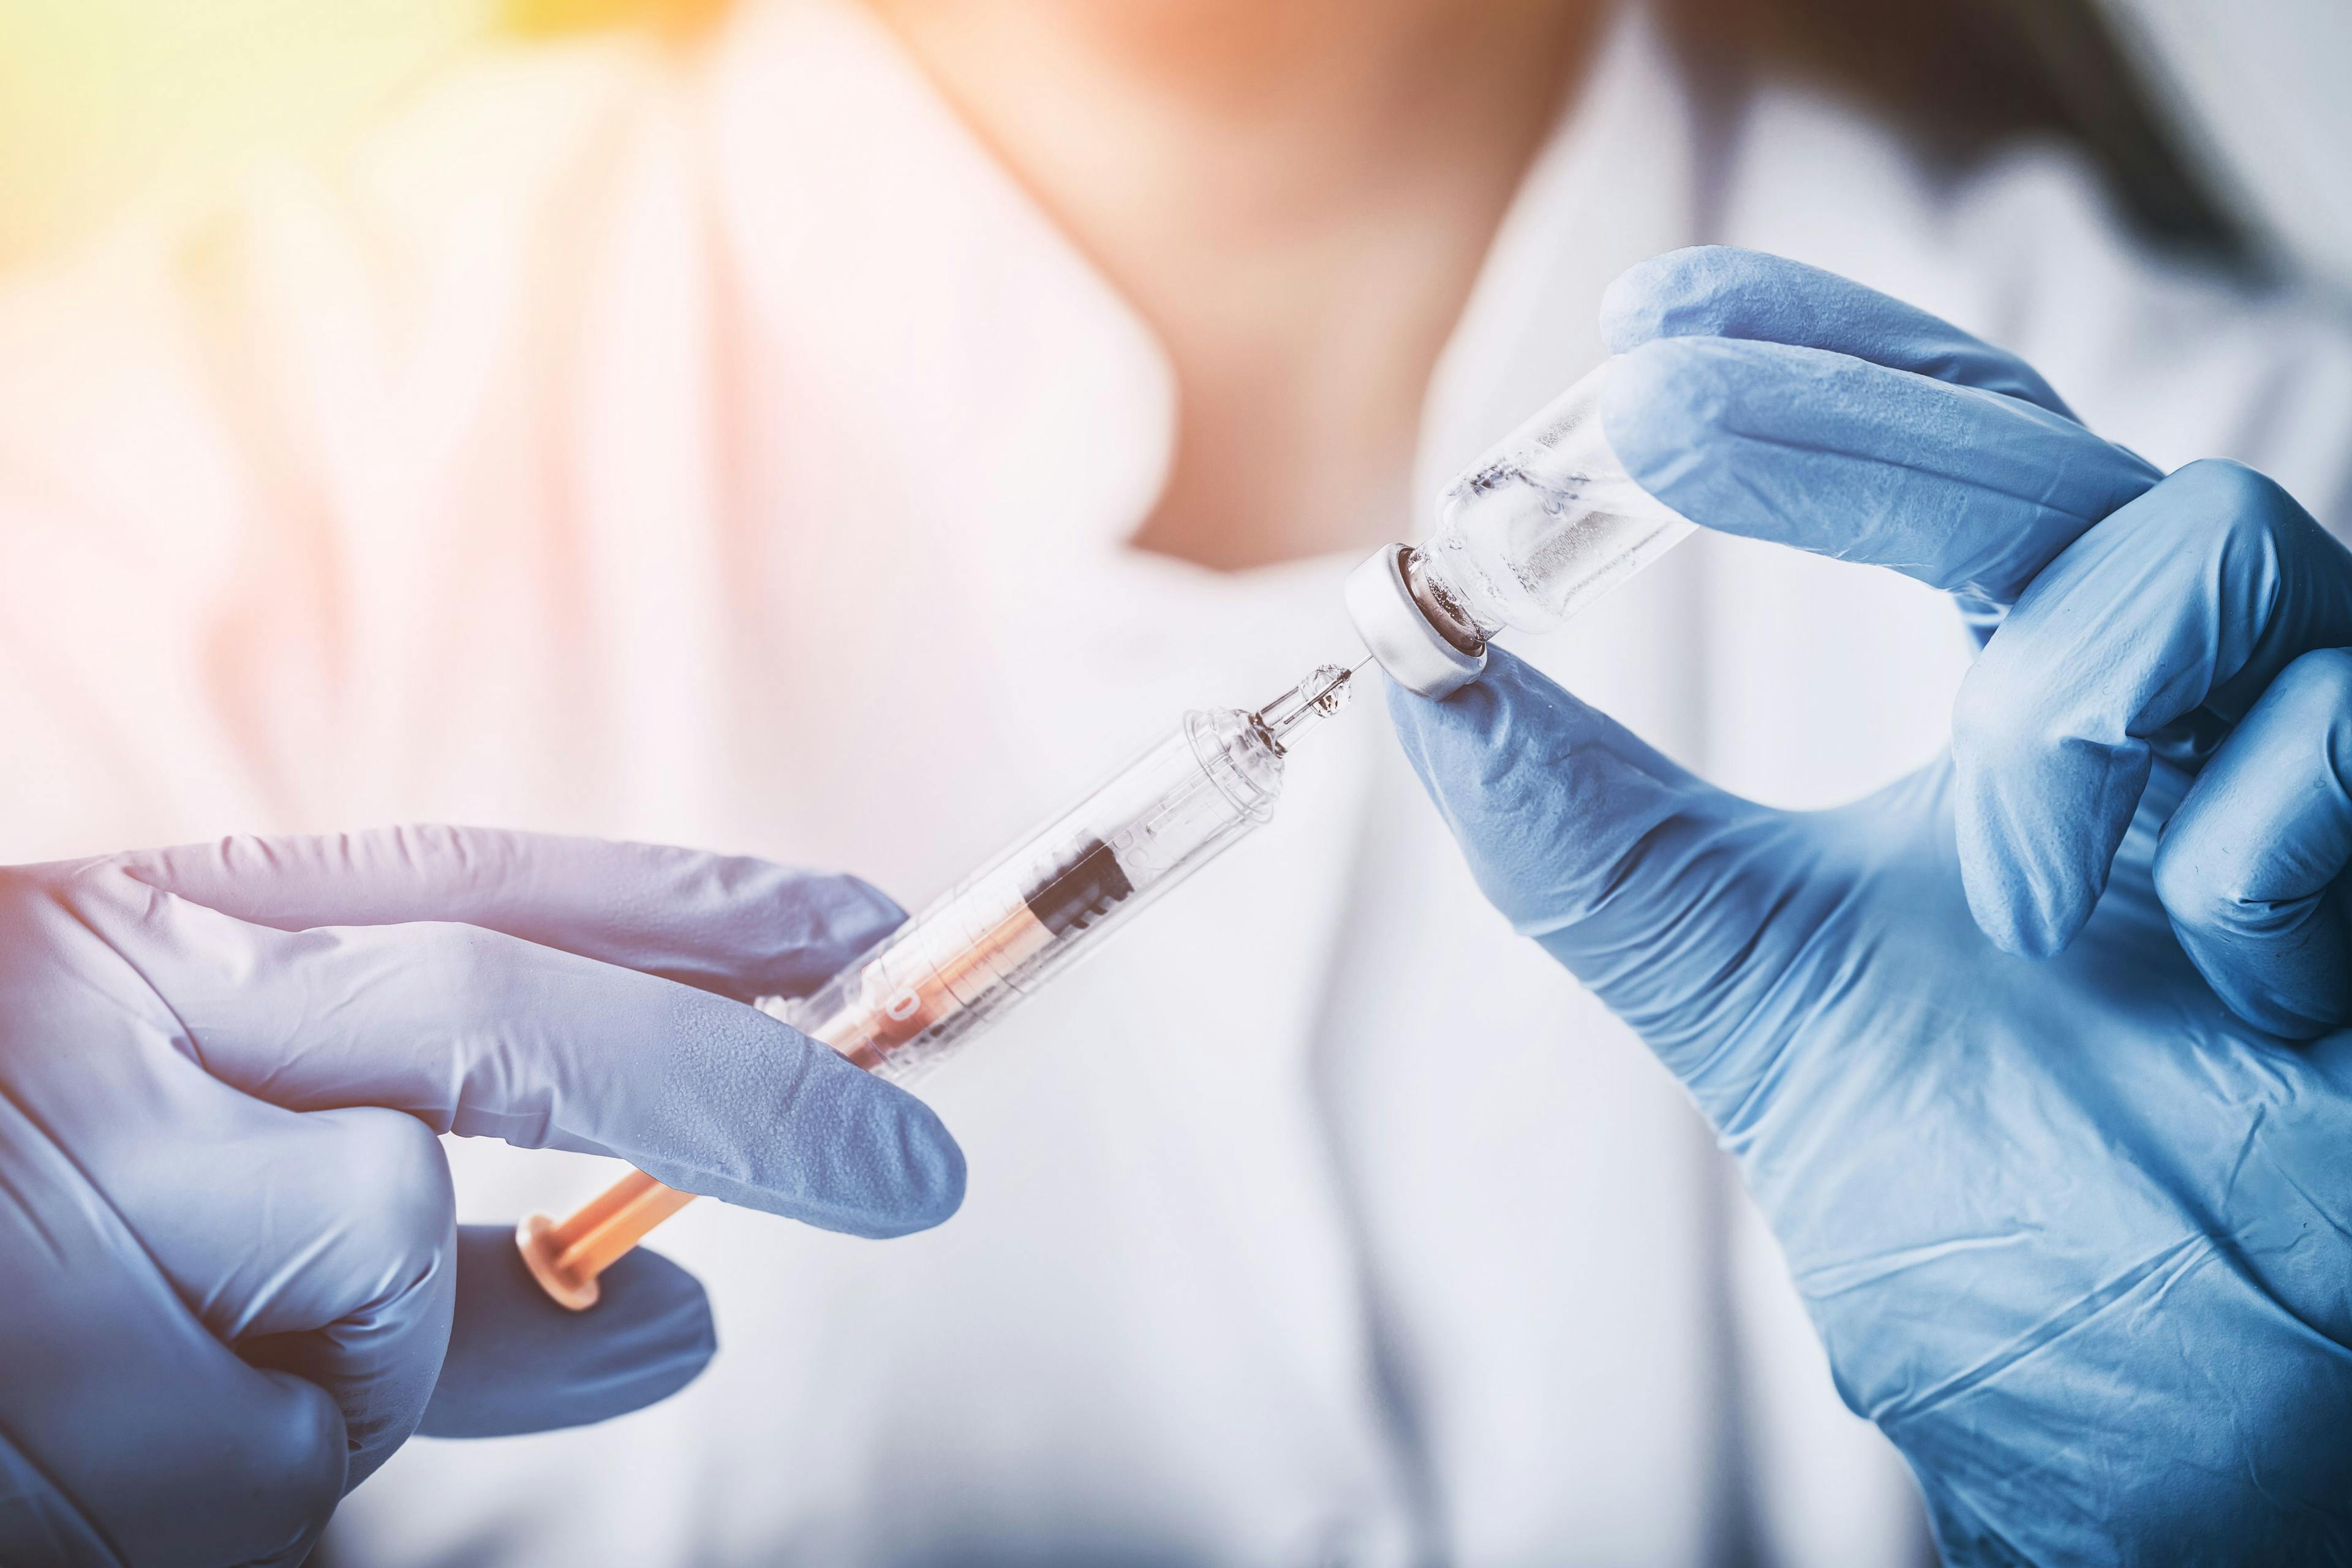 Moderna Reports 94.5% Efficacy with Its COVID-19 Vaccine